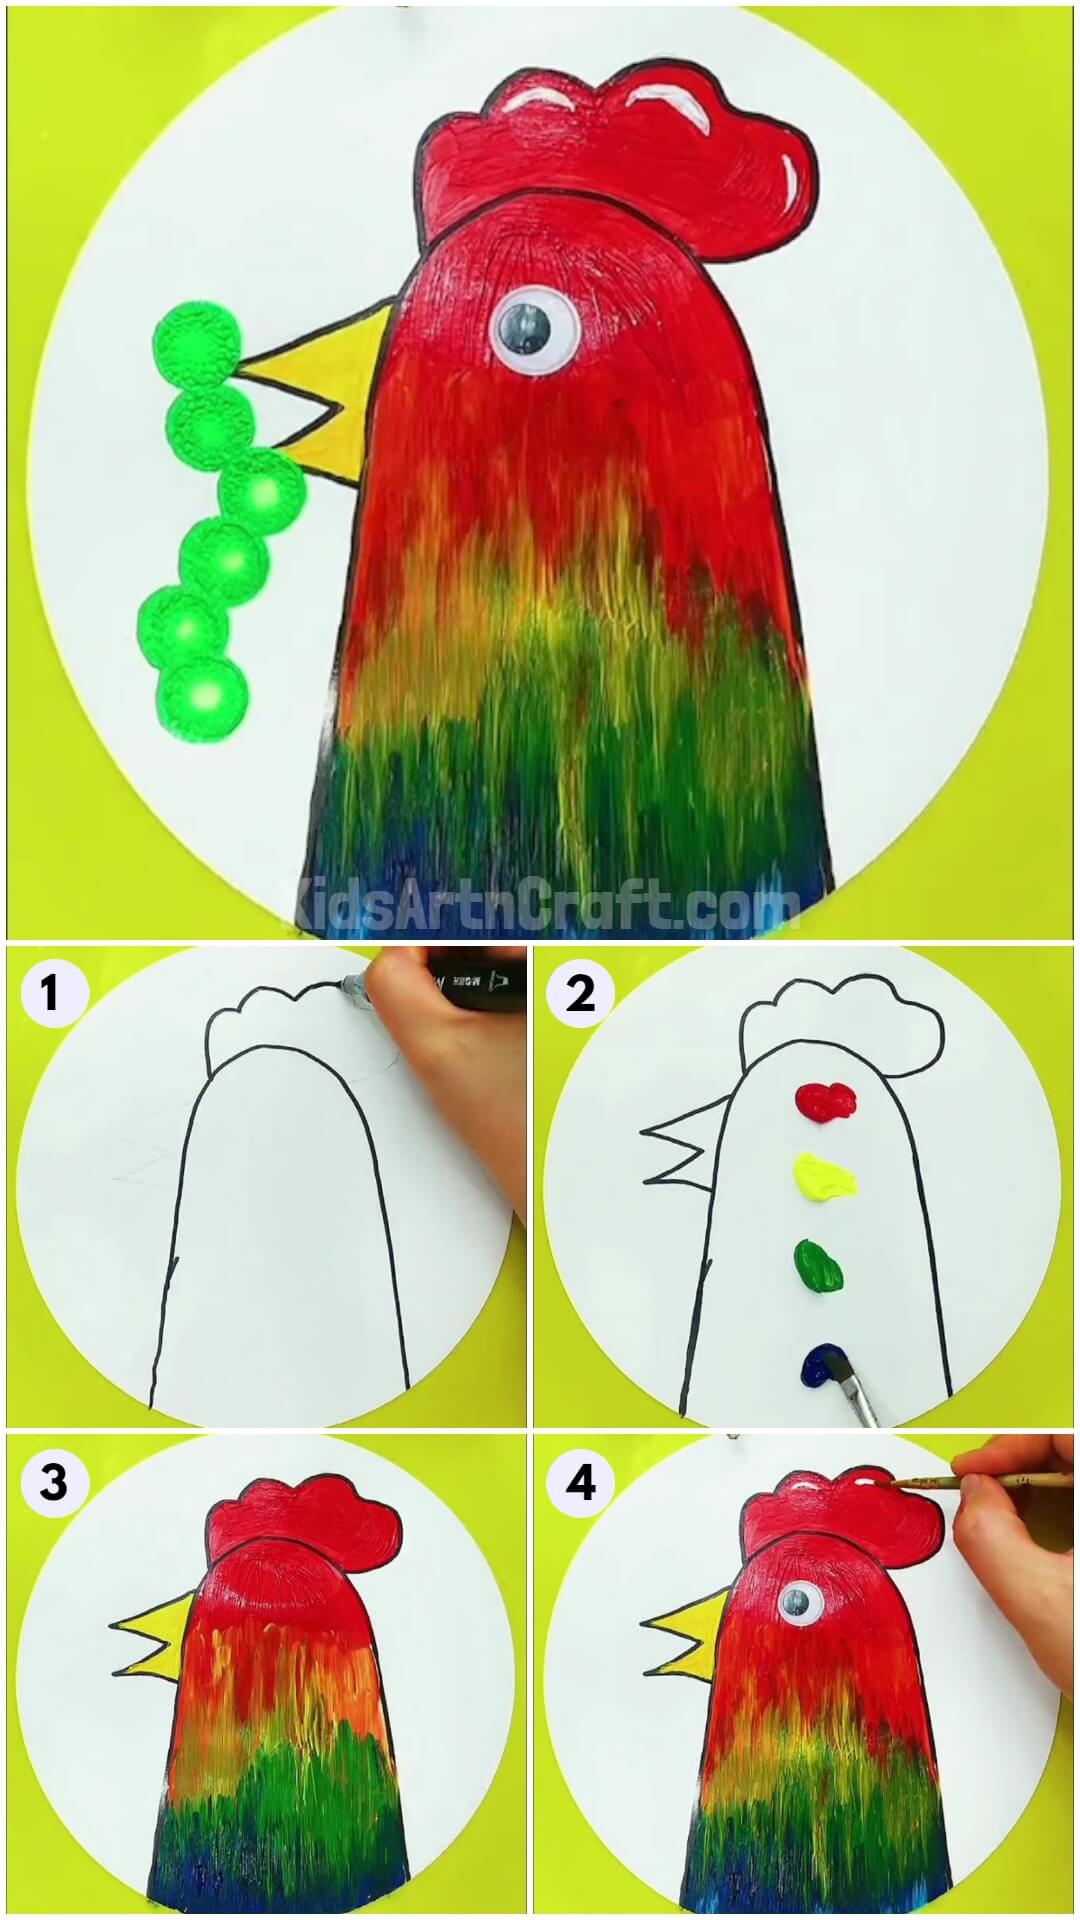 How To Make Hen Face Painting Instructions For Beginners